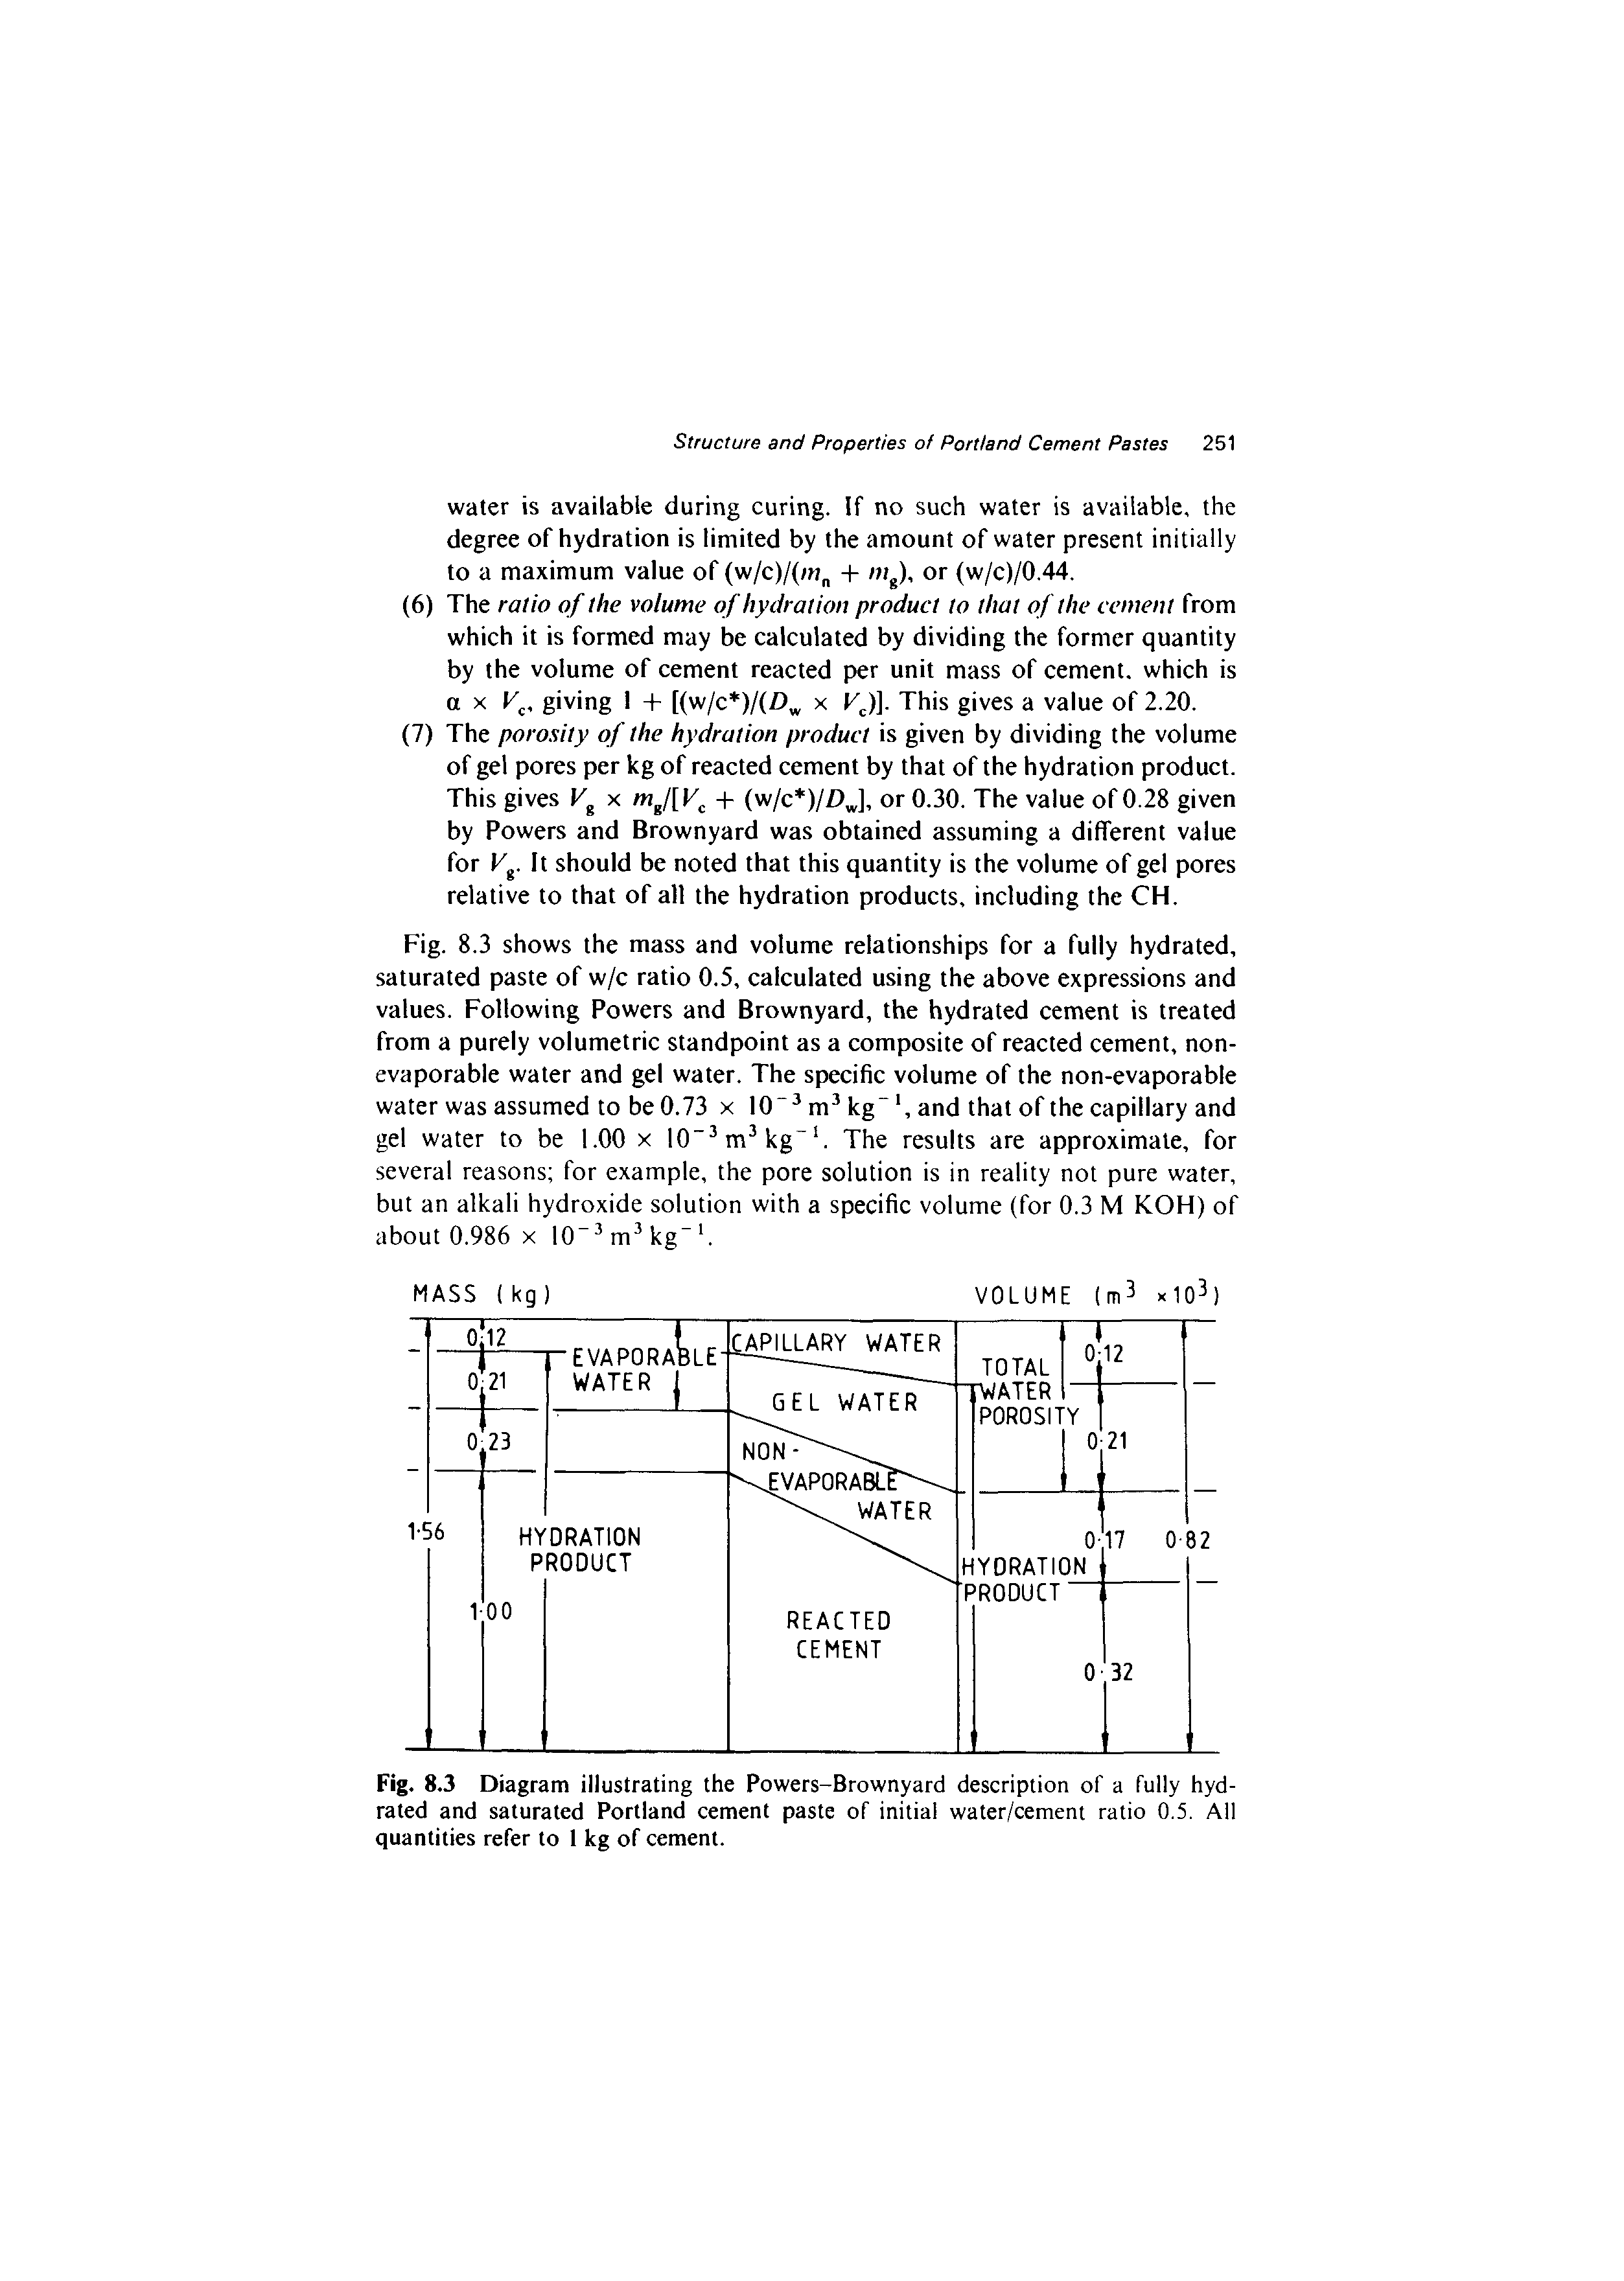 Fig. 8.3 Diagram illustrating the Powers-Brownyard description of a fully hydrated and saturated Portland cement paste of initial water/cement ratio 0.5. All quantities refer to 1 kg of cement.